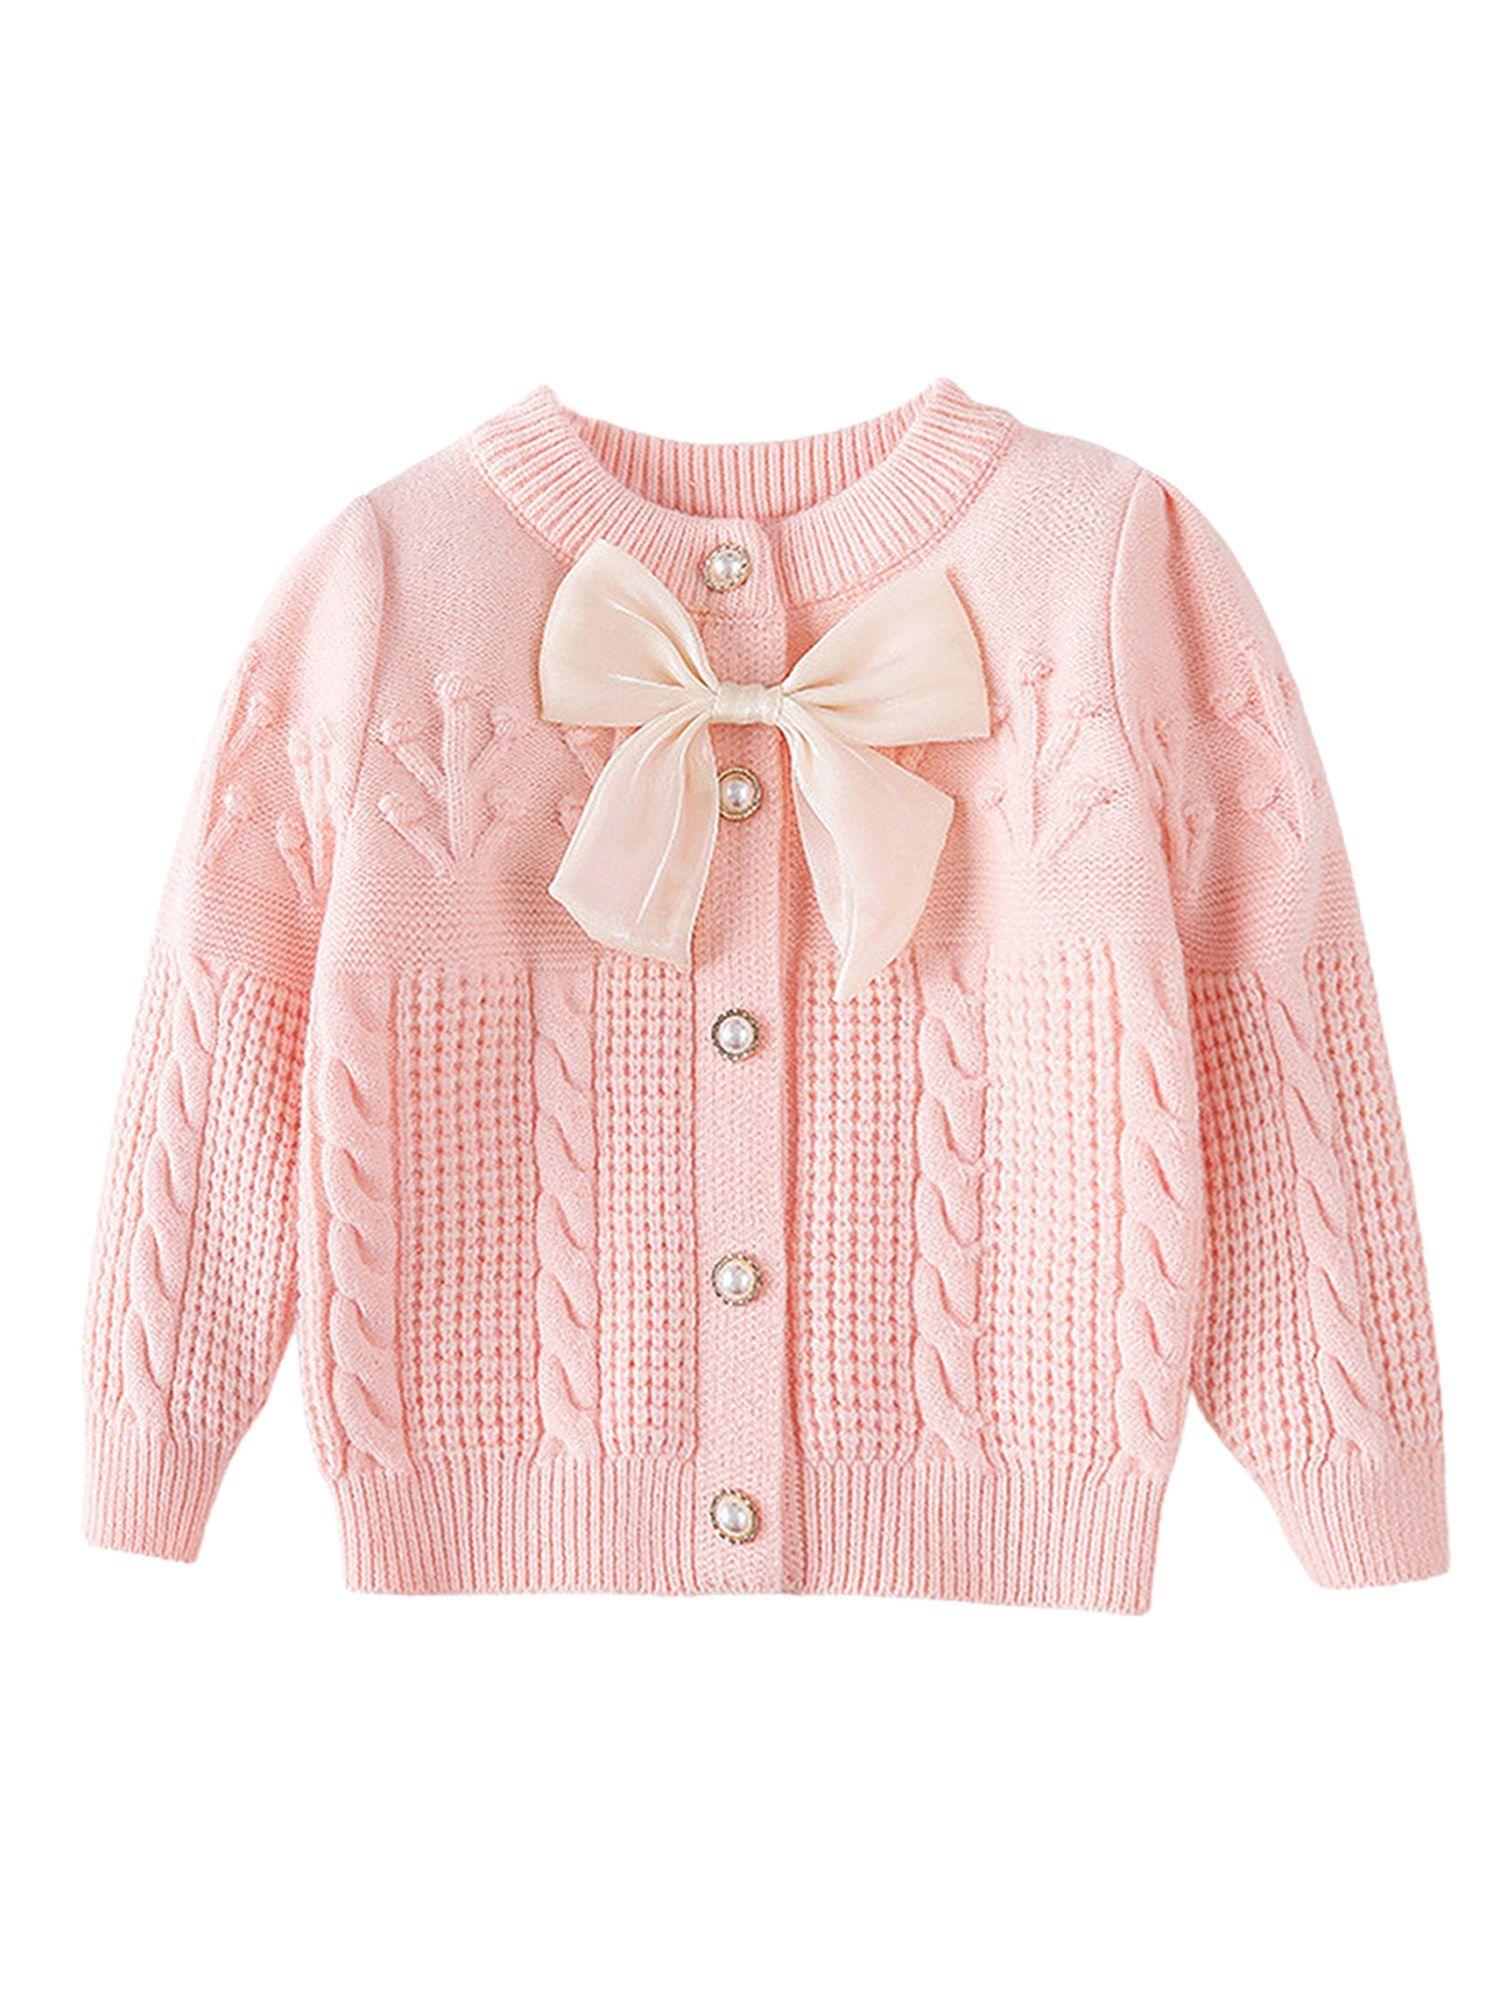 kids-baby-pink-knitted-cardigan-sweater-with-bow